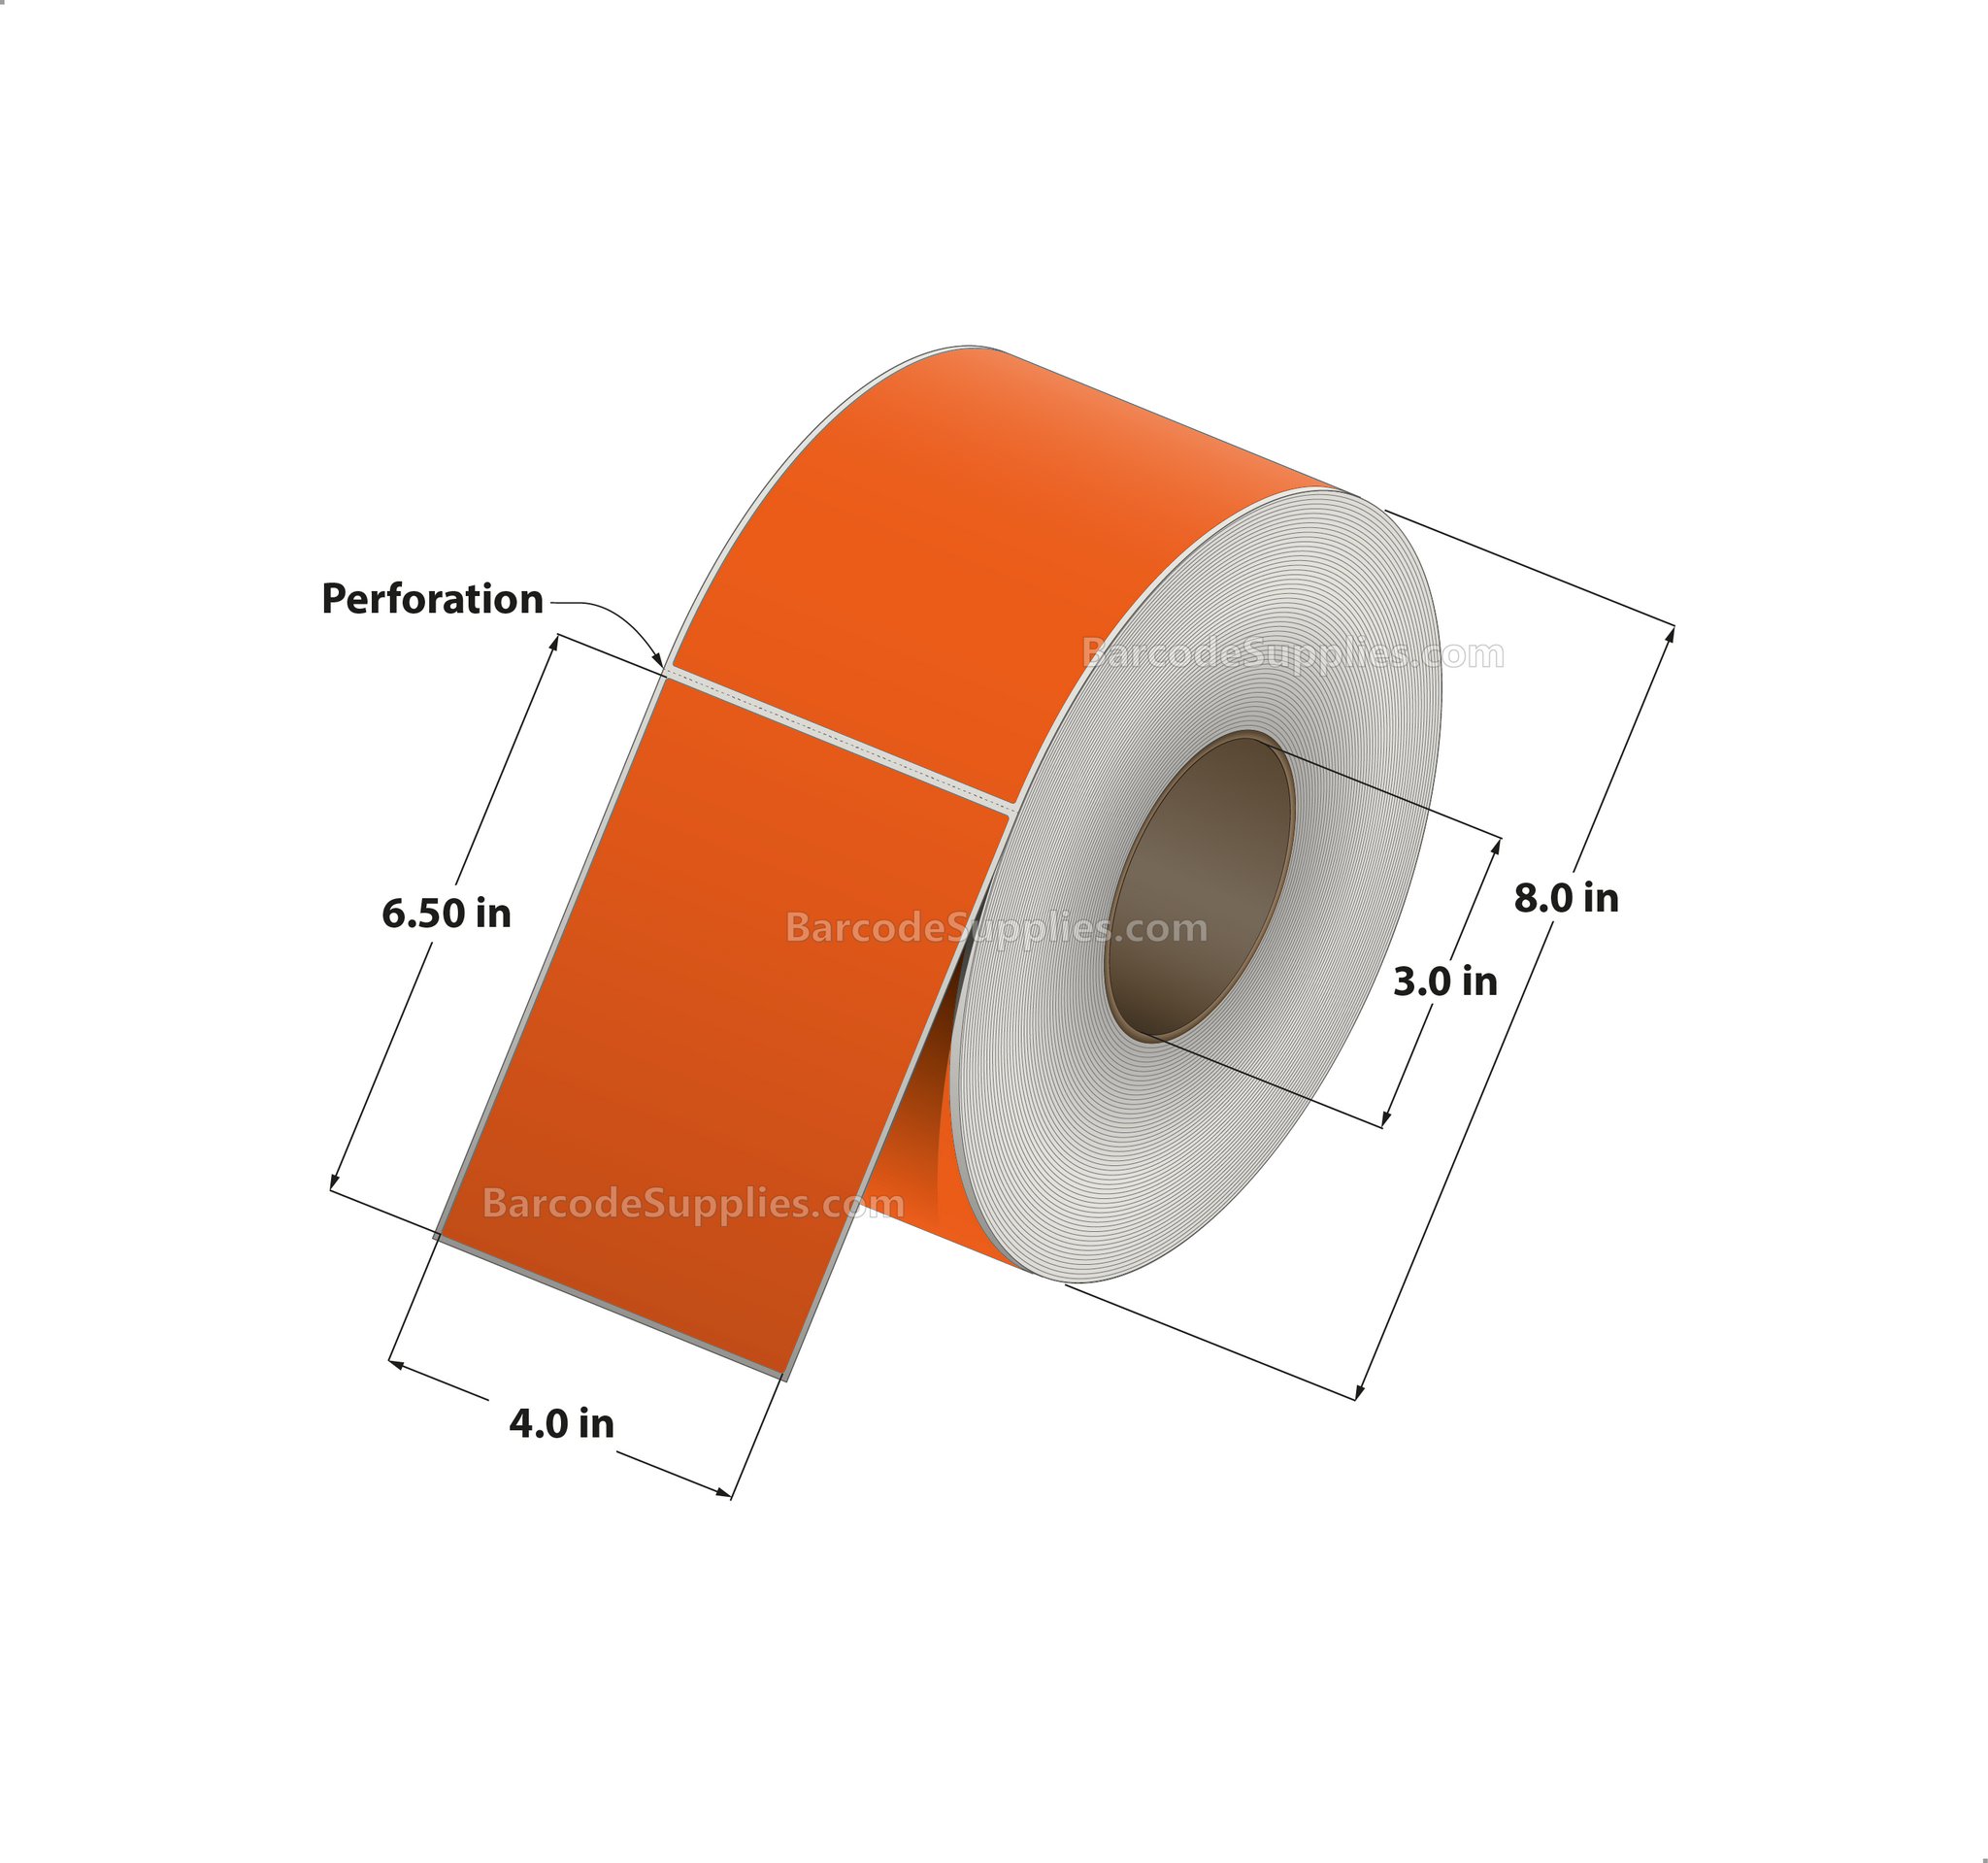 4 x 6.5 Thermal Transfer 1495 Orange Labels With Permanent Adhesive - Perforated - 900 Labels Per Roll - Carton Of 4 Rolls - 3600 Labels Total - MPN: RFC-4-65-900-OR